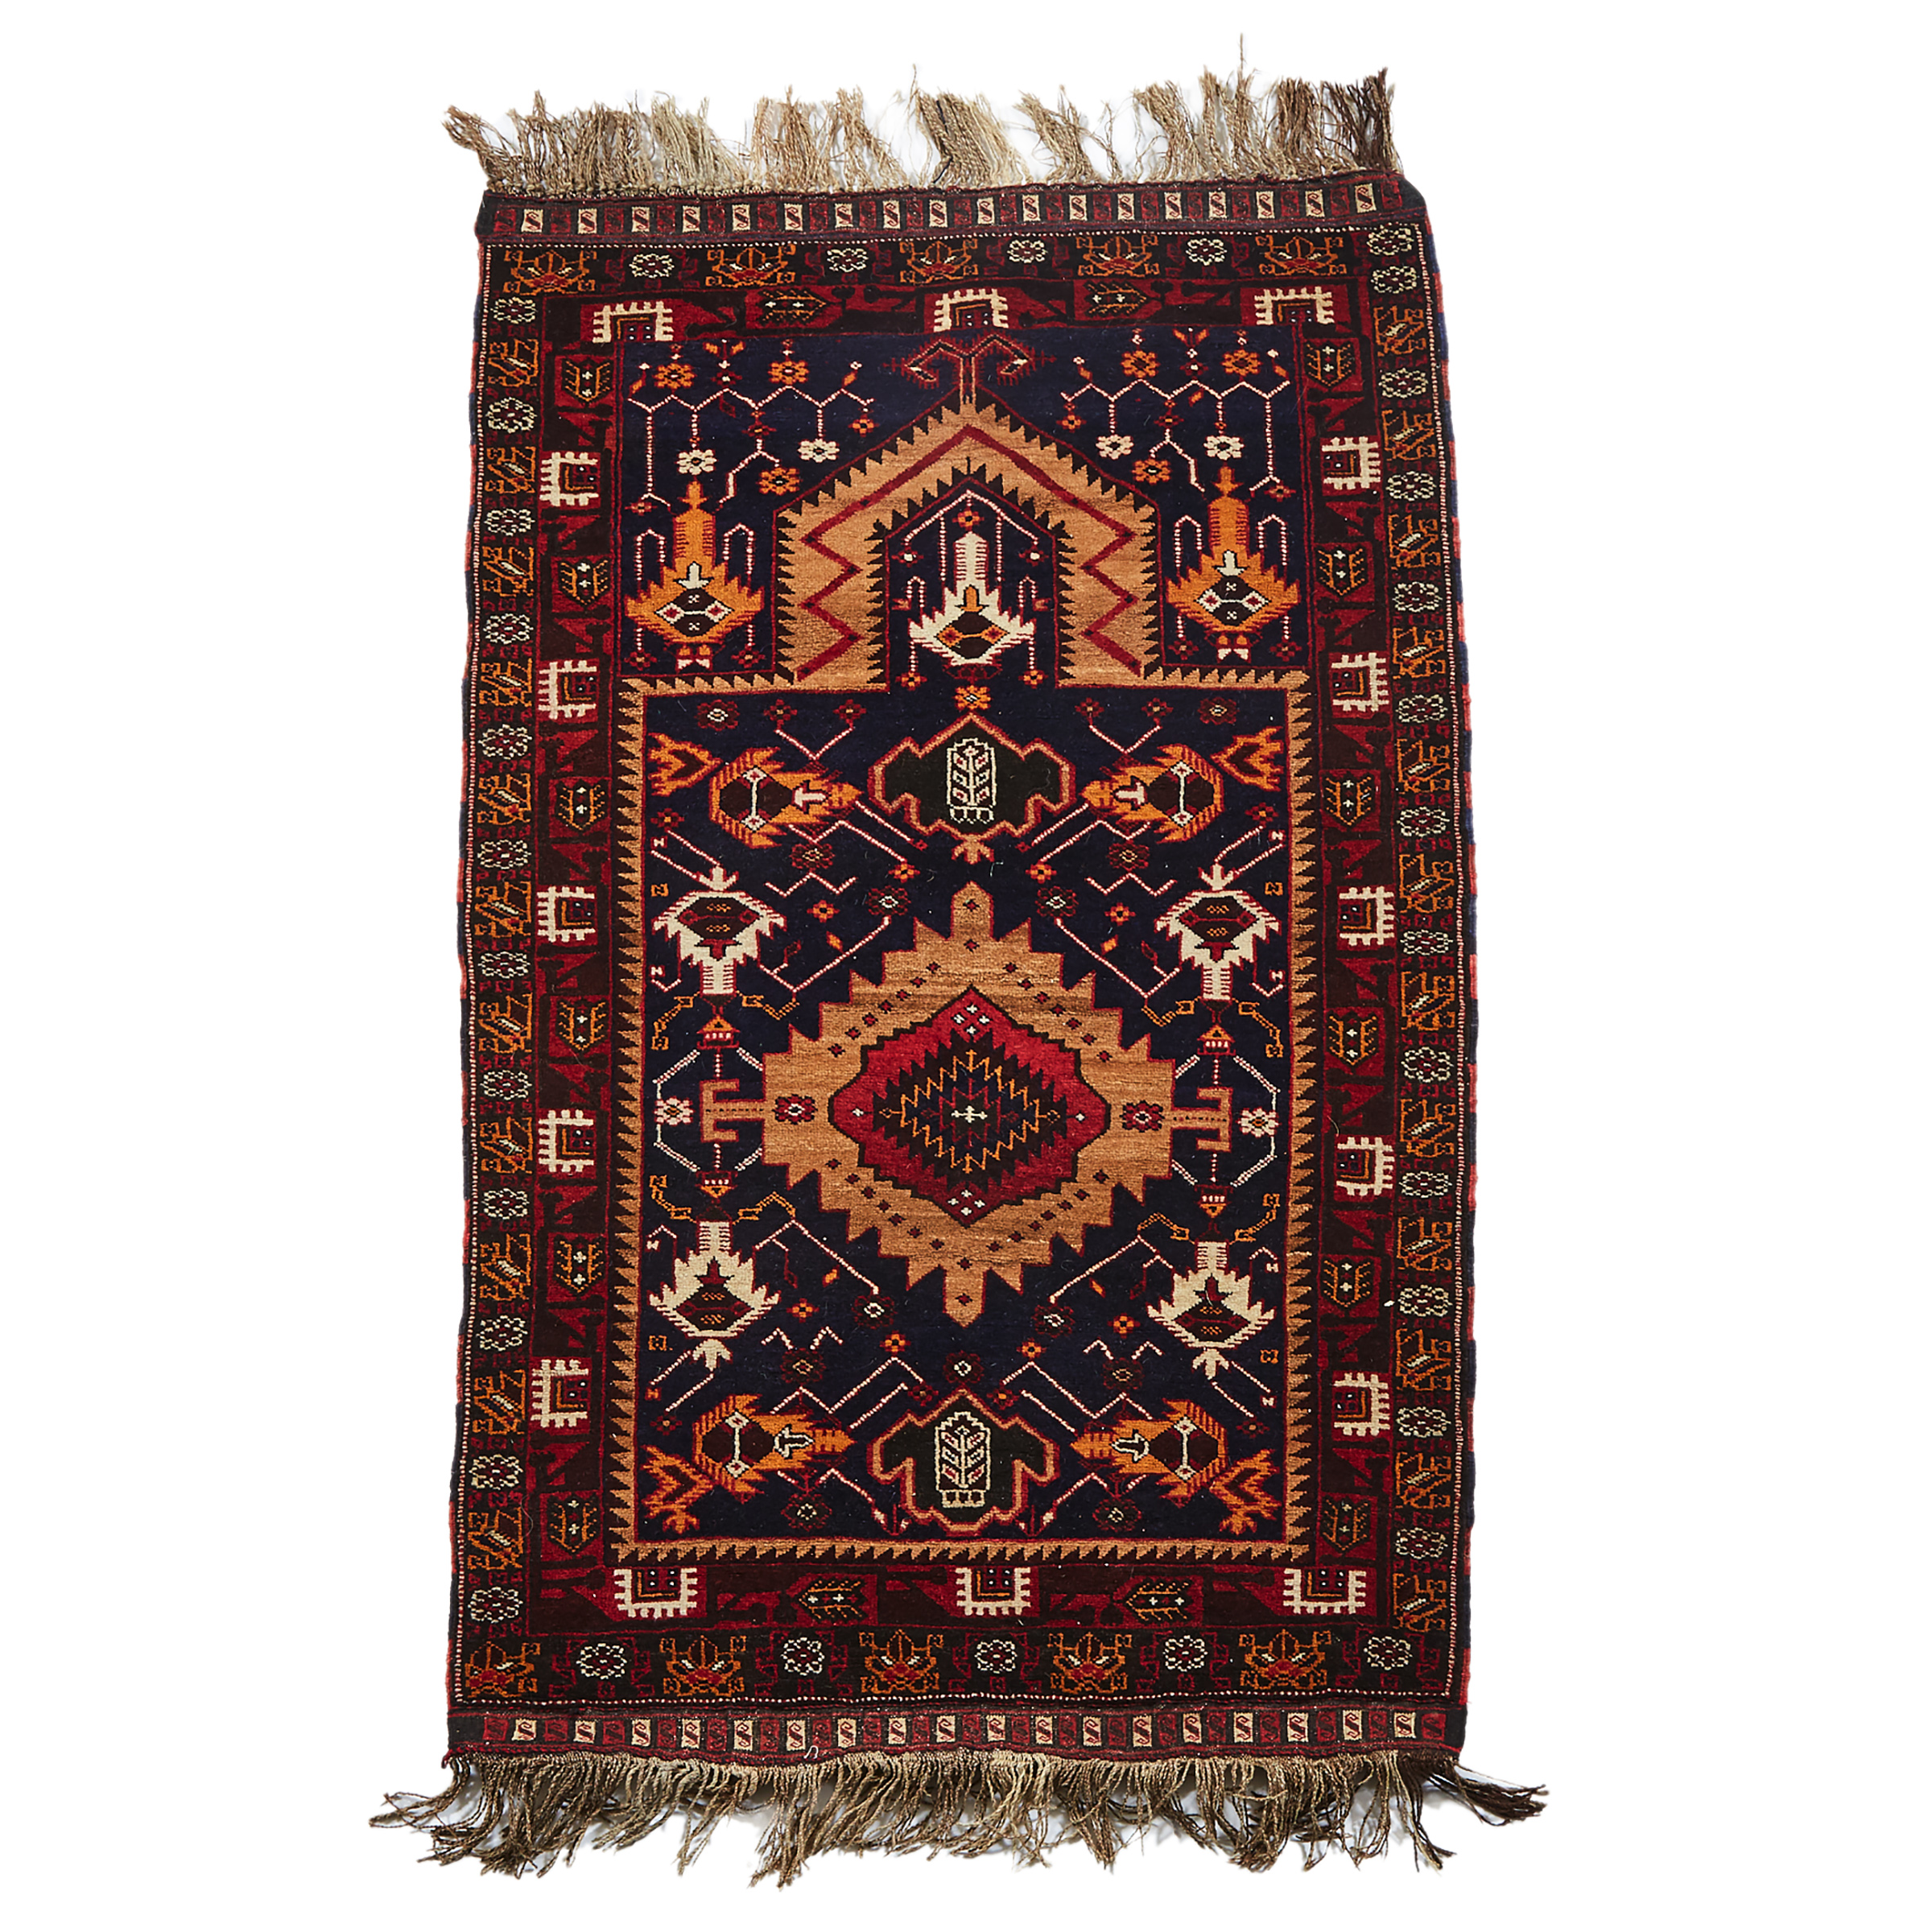 Afghan Baluch Prayer Rug, mid to late 20th century